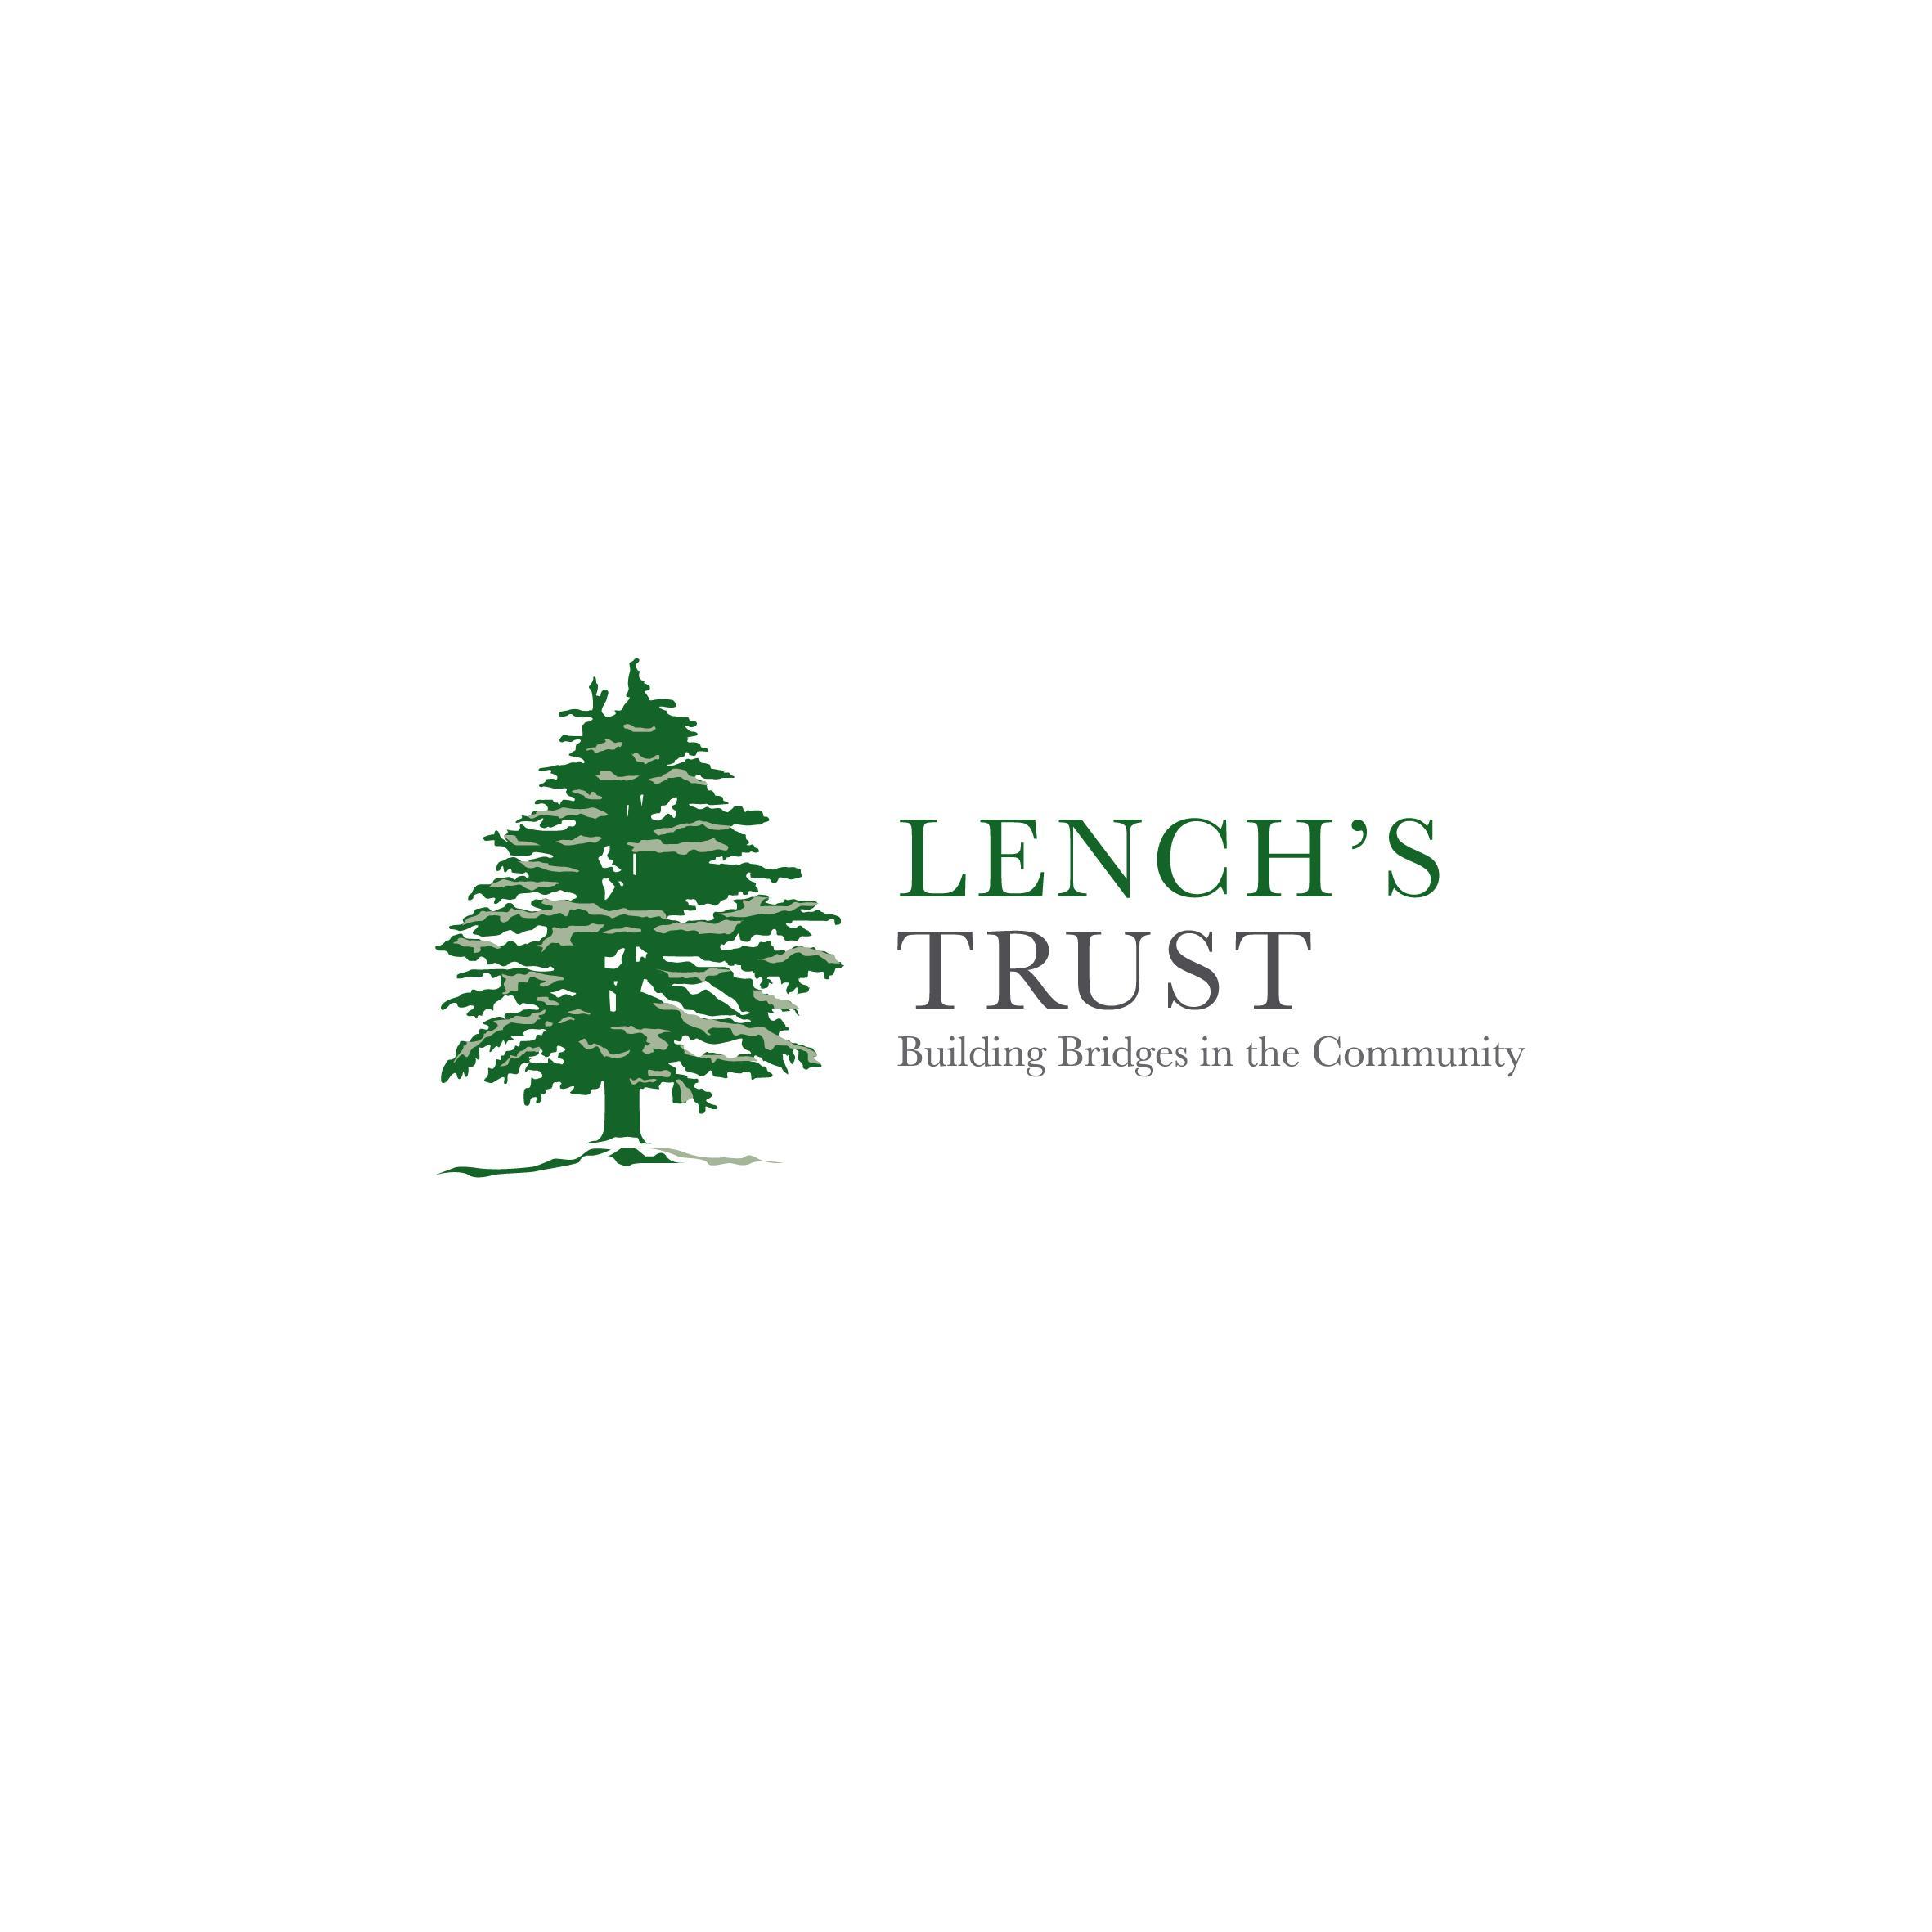 One of Birmingham's oldest charities, Lench's Trust provides sheltered housing and care for the elderly in need.